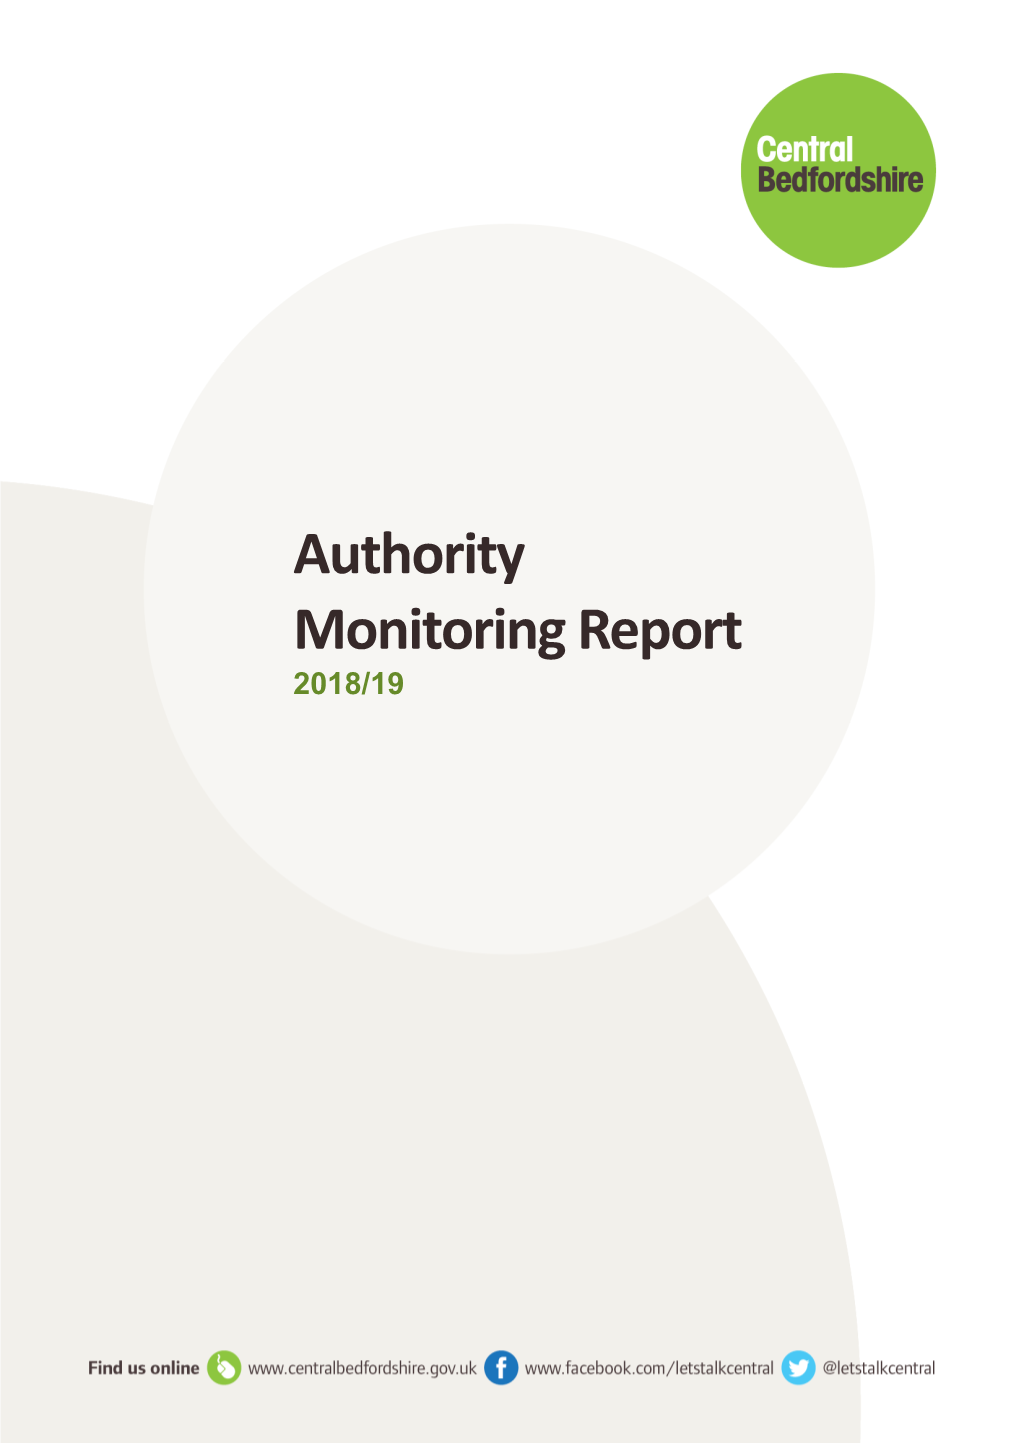 Authority M Onitoringr Eport 2018 /19 Contents